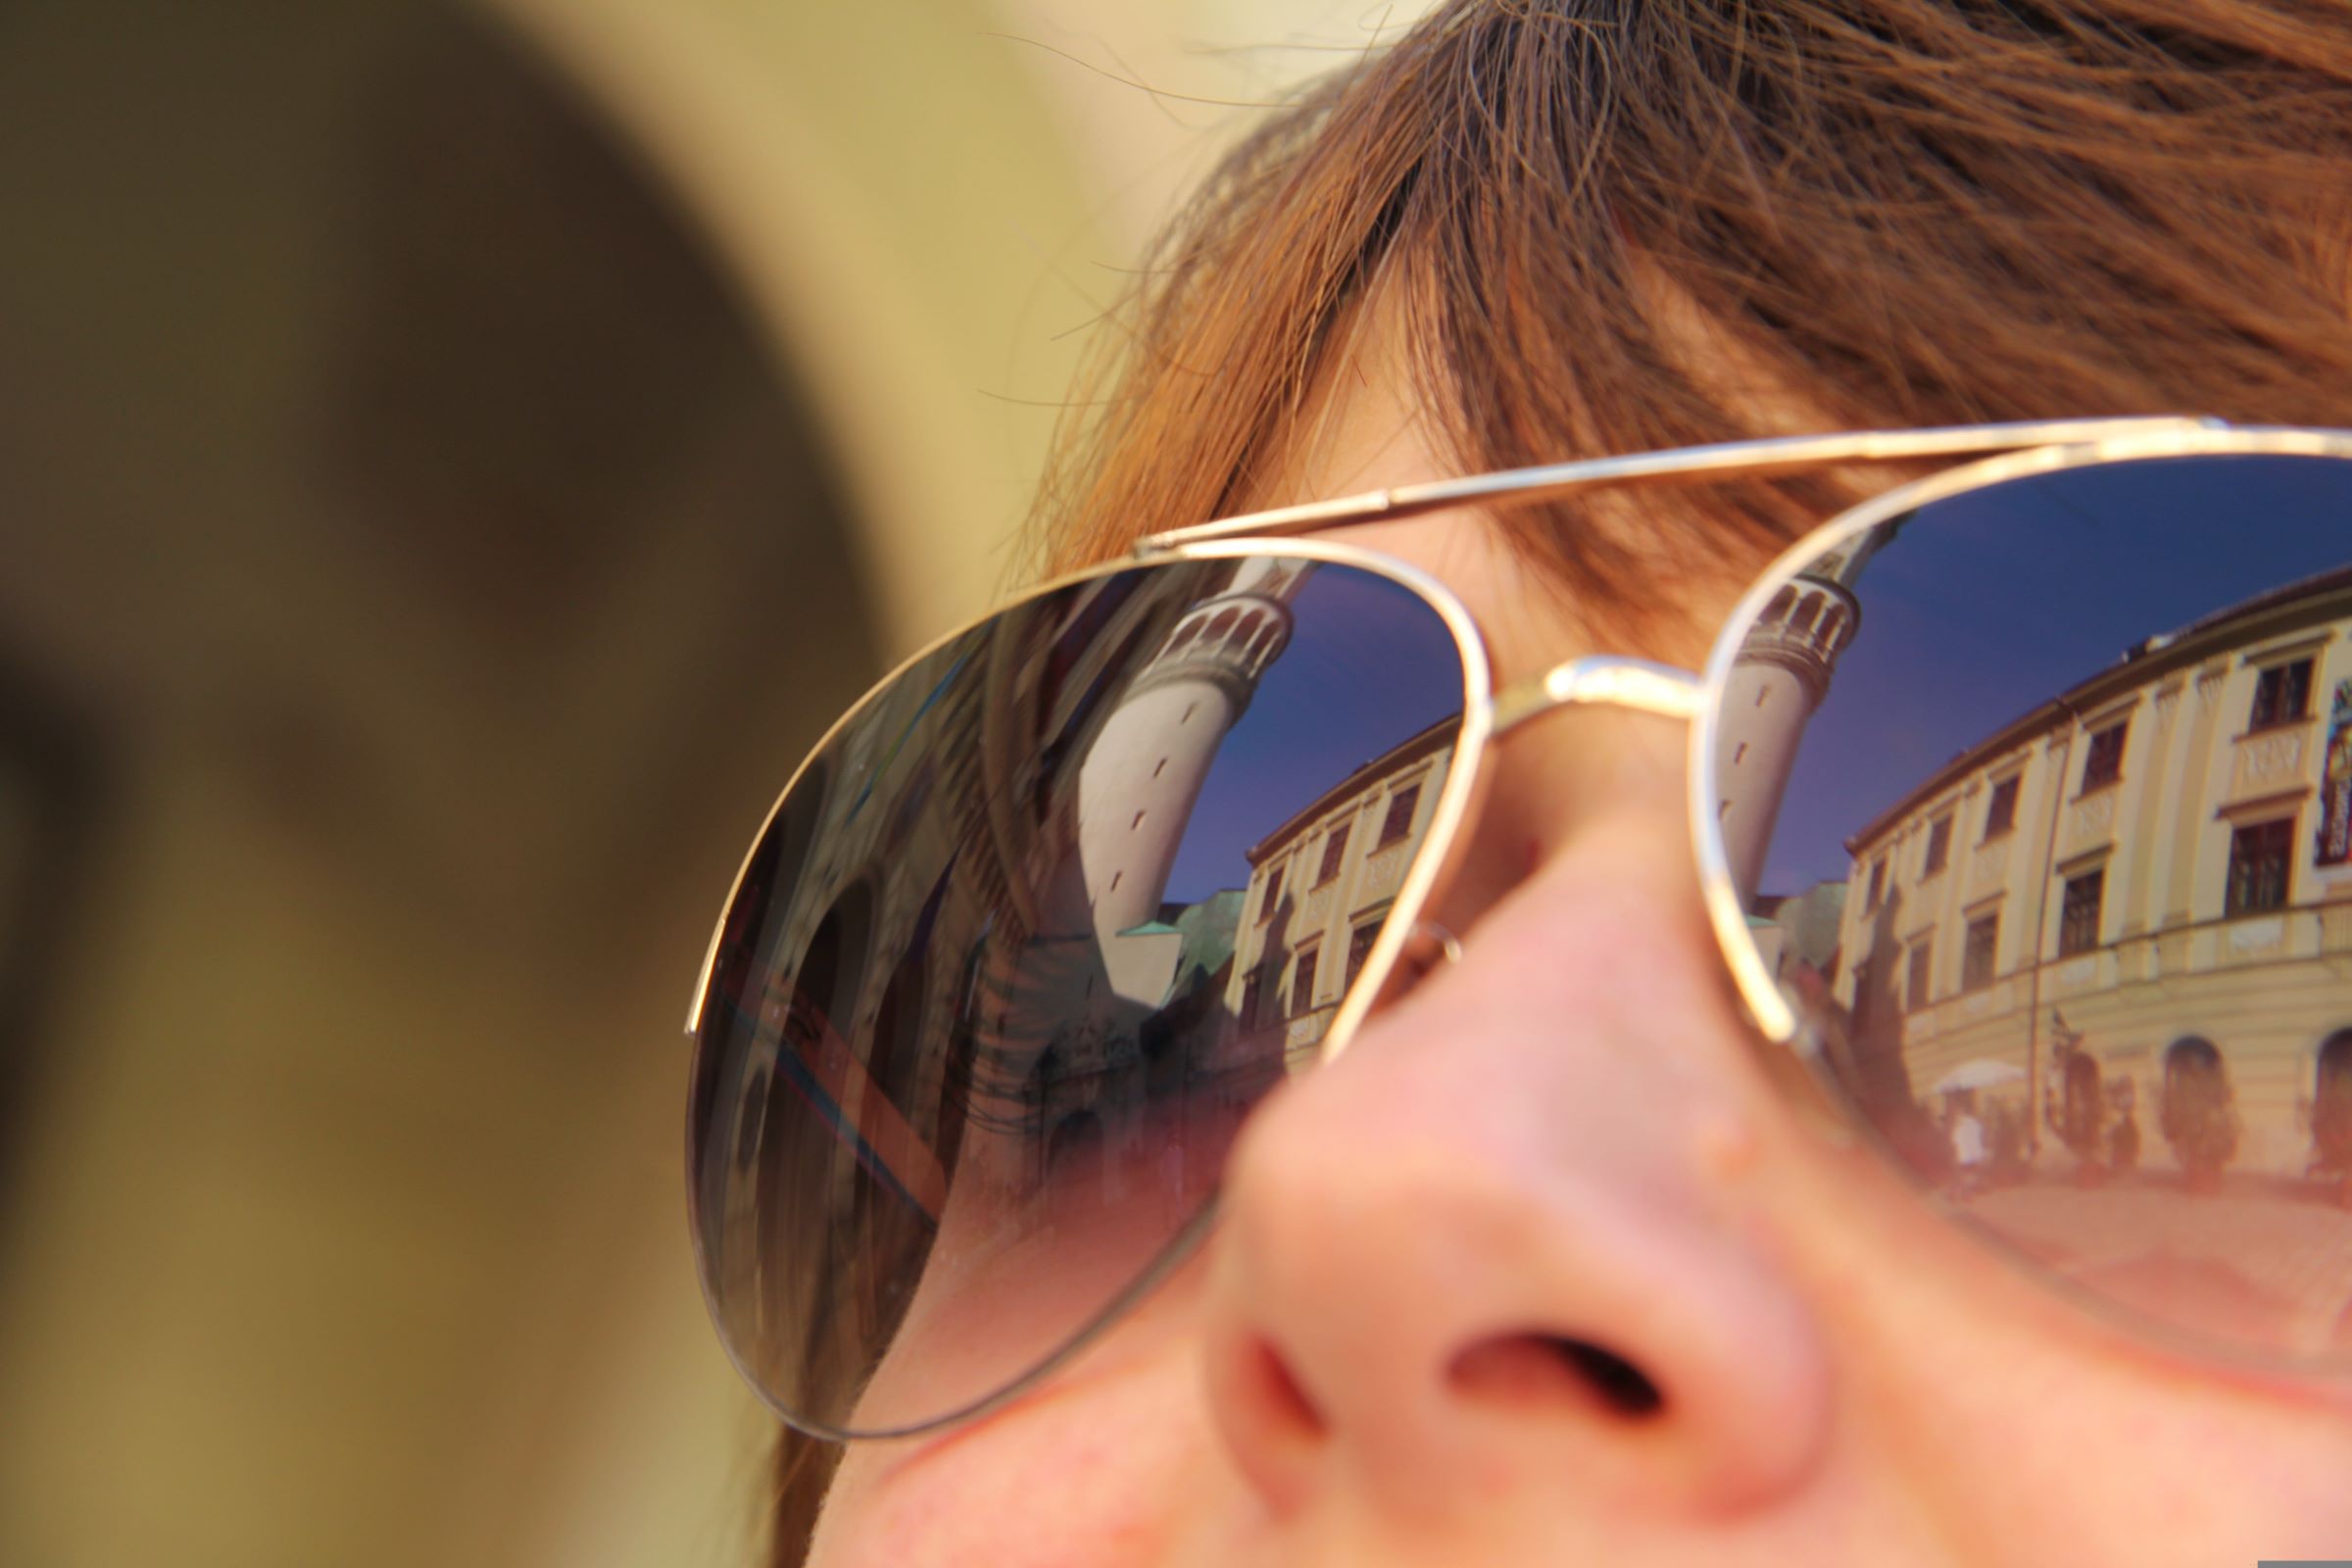 A woman looking at buildings reflected in her sunglasses. | Source: Pixabay